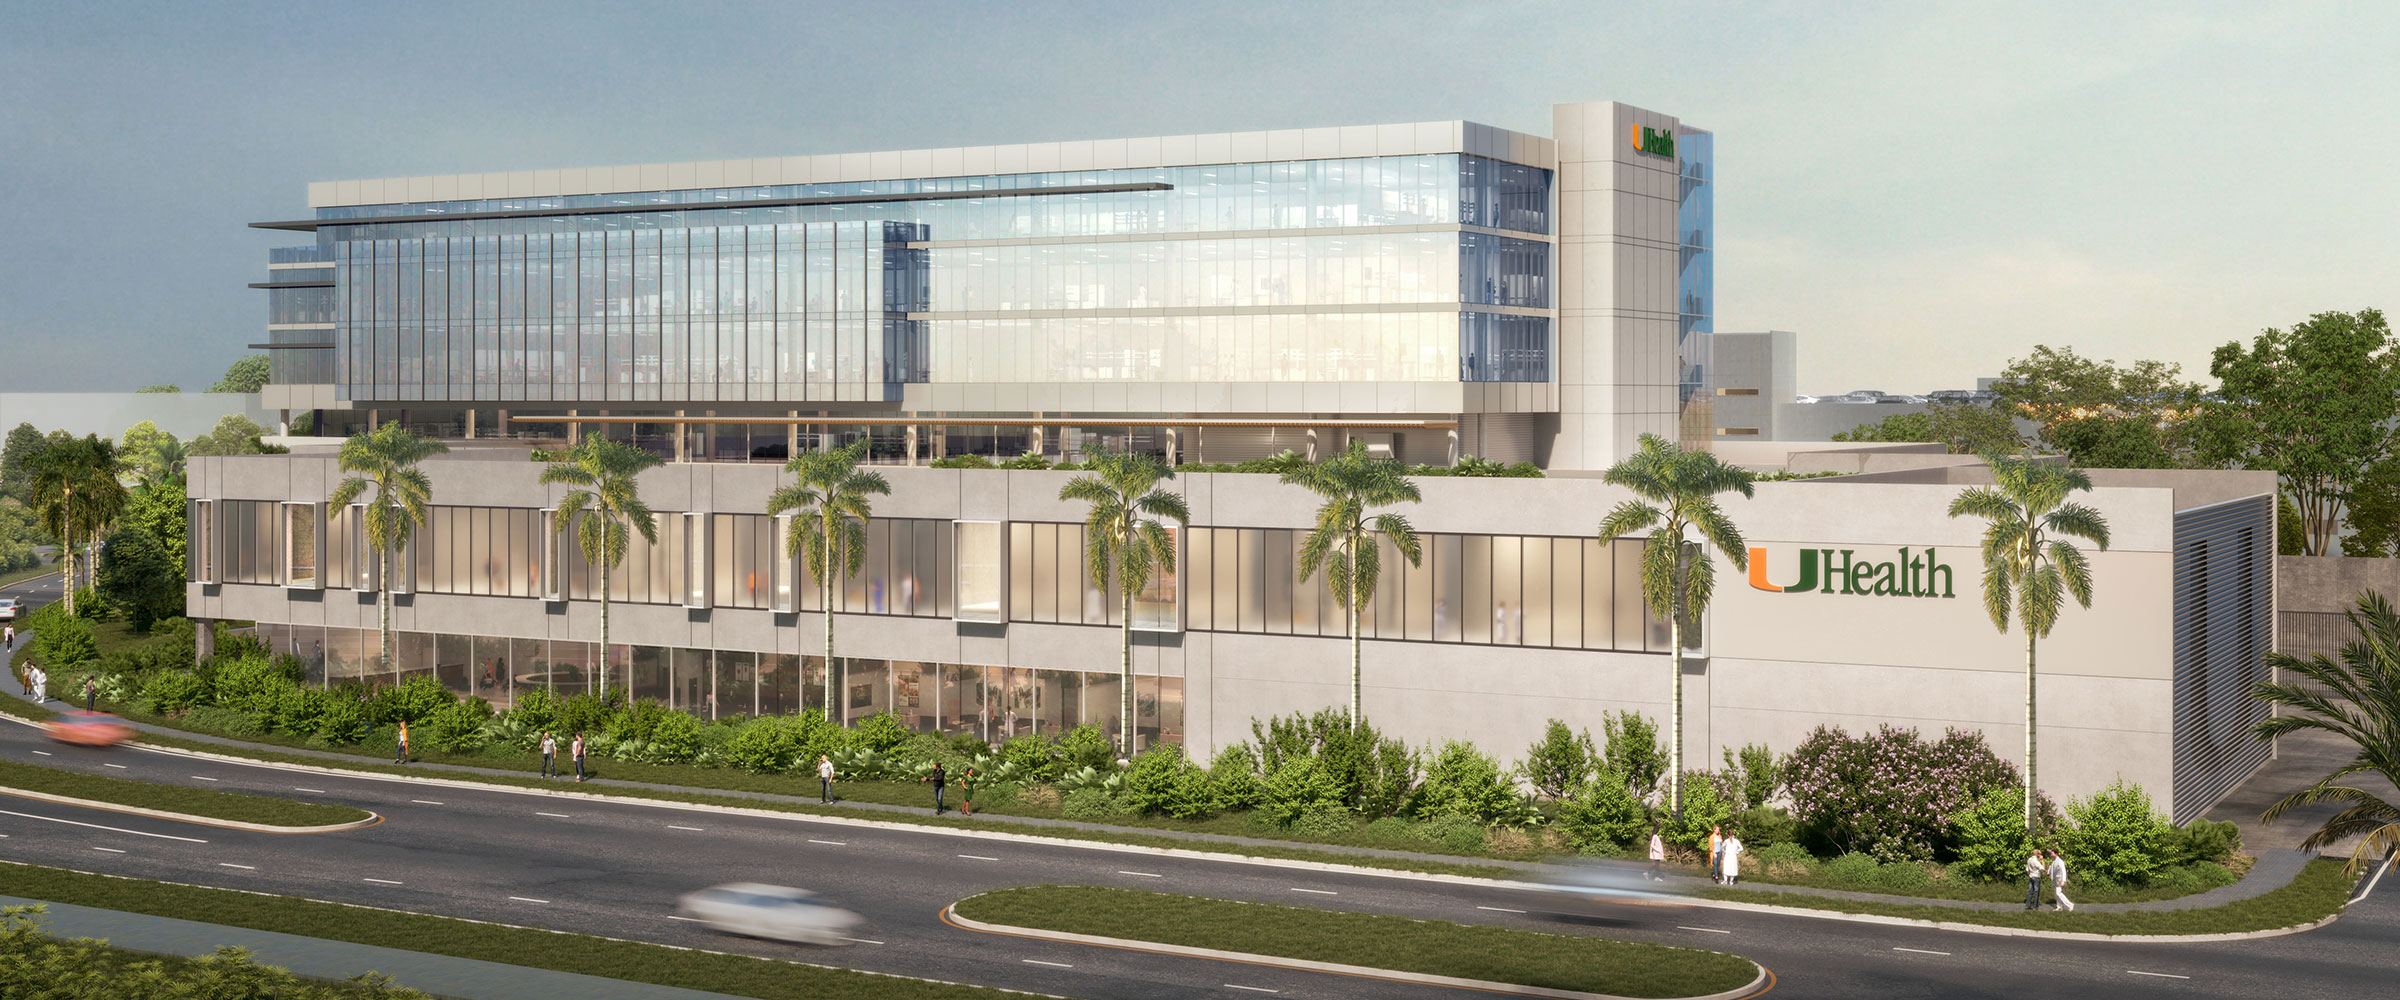 East Architectural Rendering of UHealth at SoLé Mia in Aventura